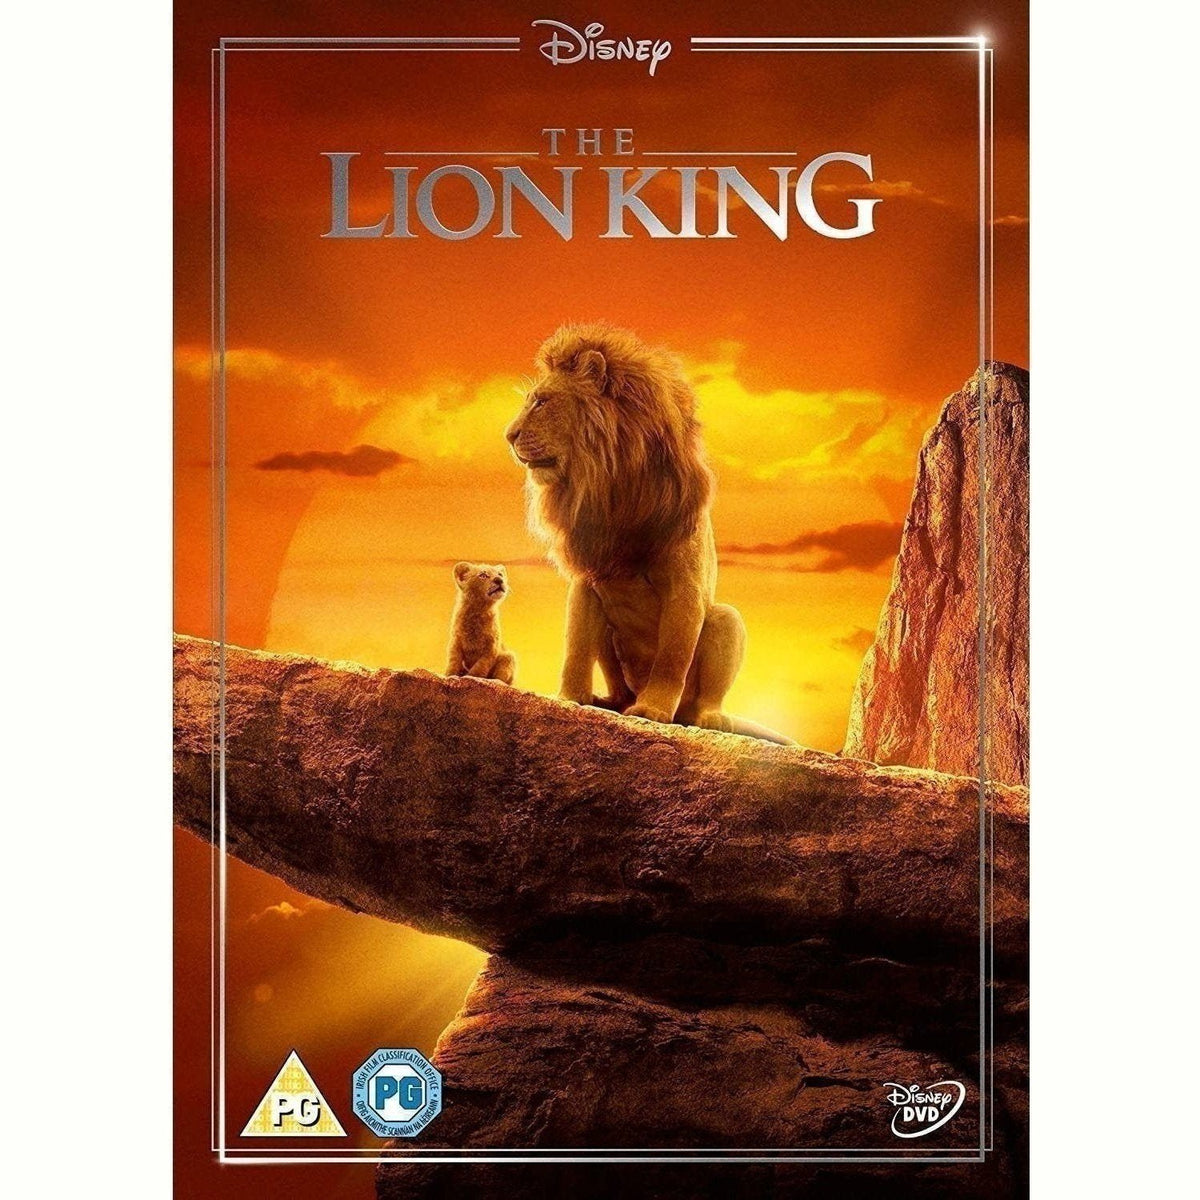 The Lion King - Live Action DVD 2019